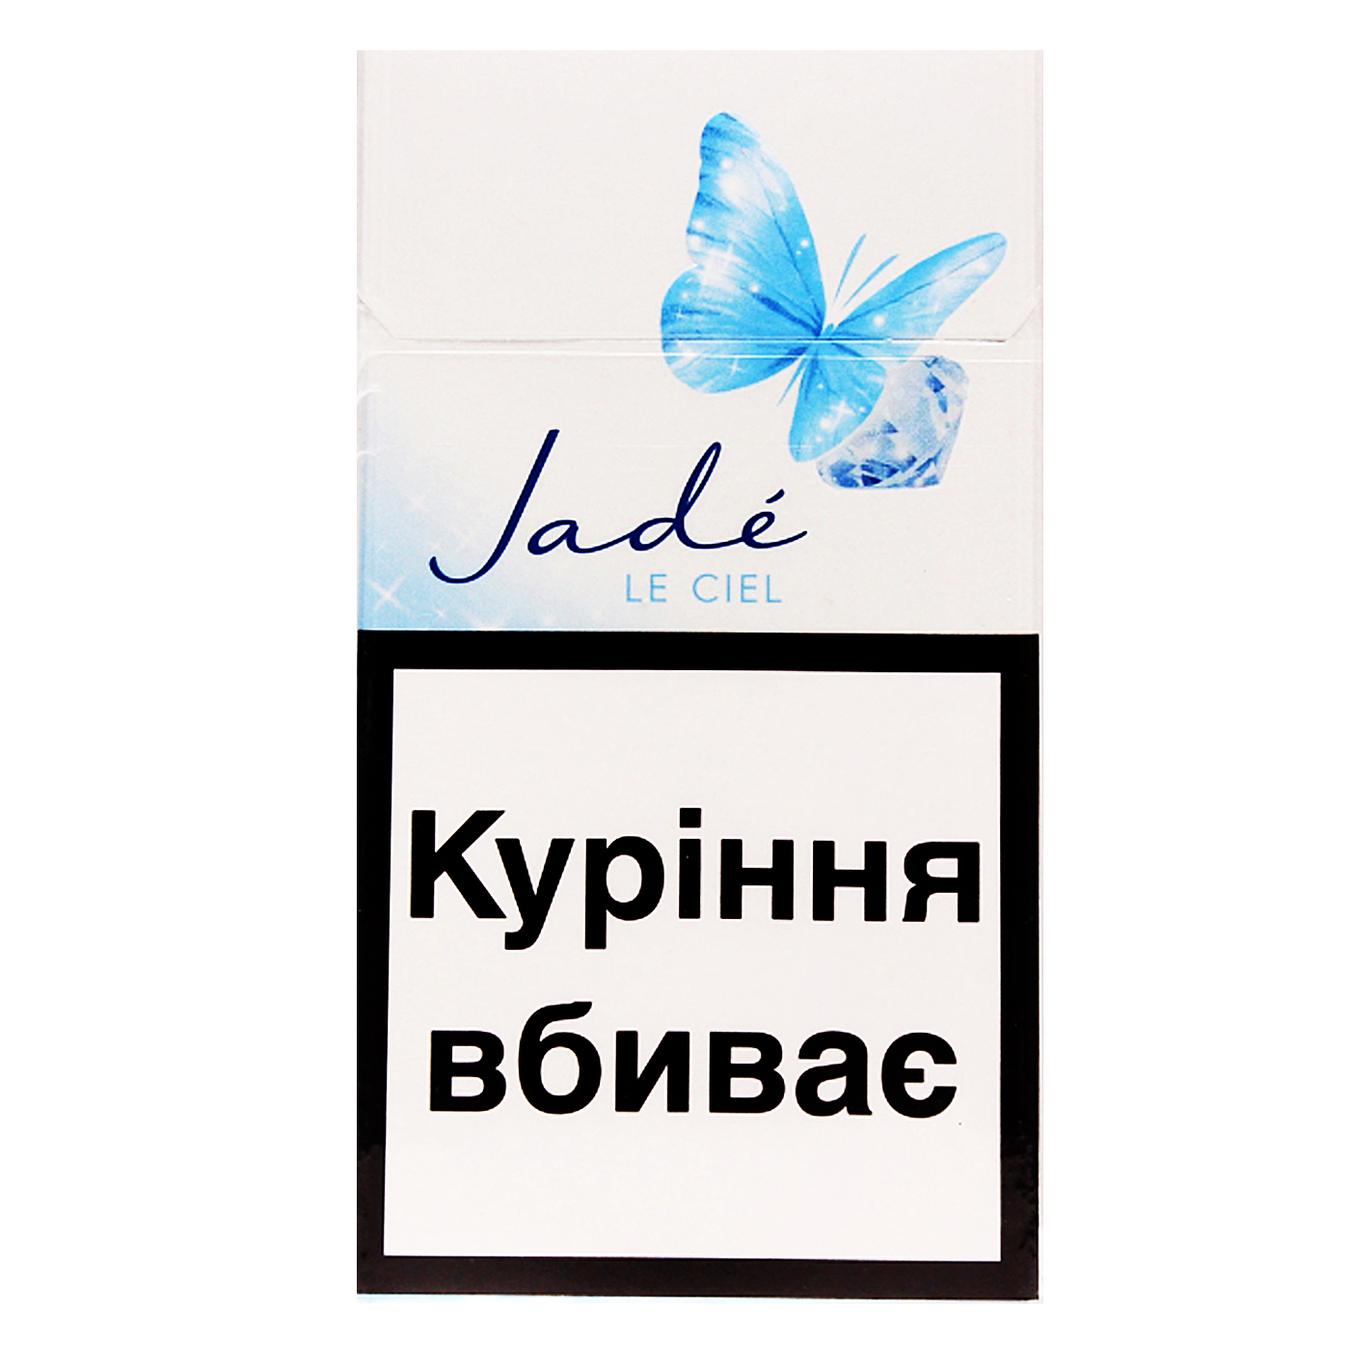 Jade La Ciel cigarettes (the price is without excise duty)